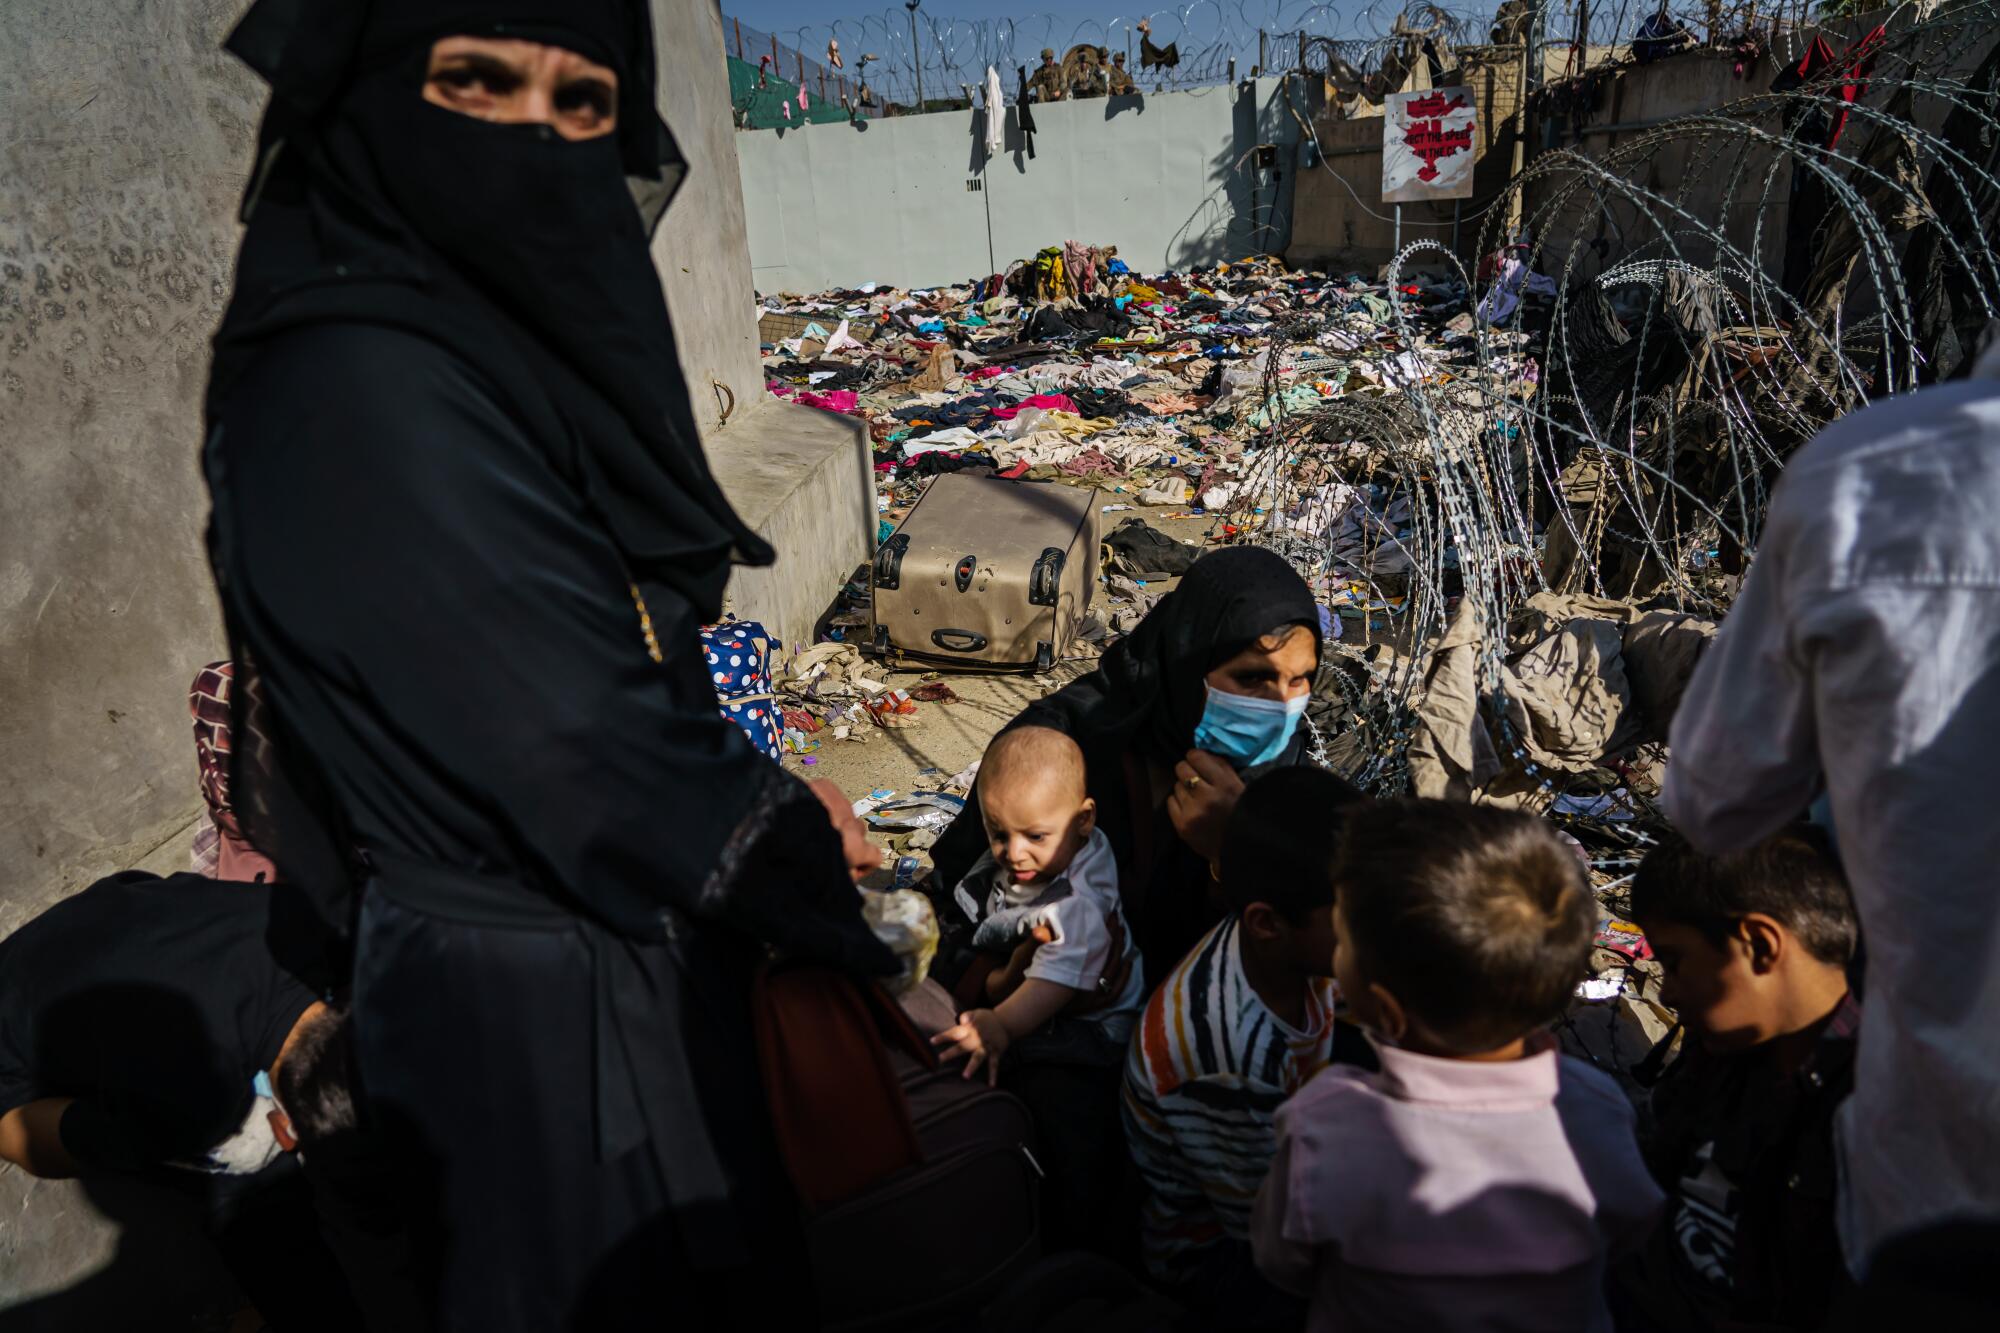 A woman in a black burqa next to women and children crouching near barbed wire